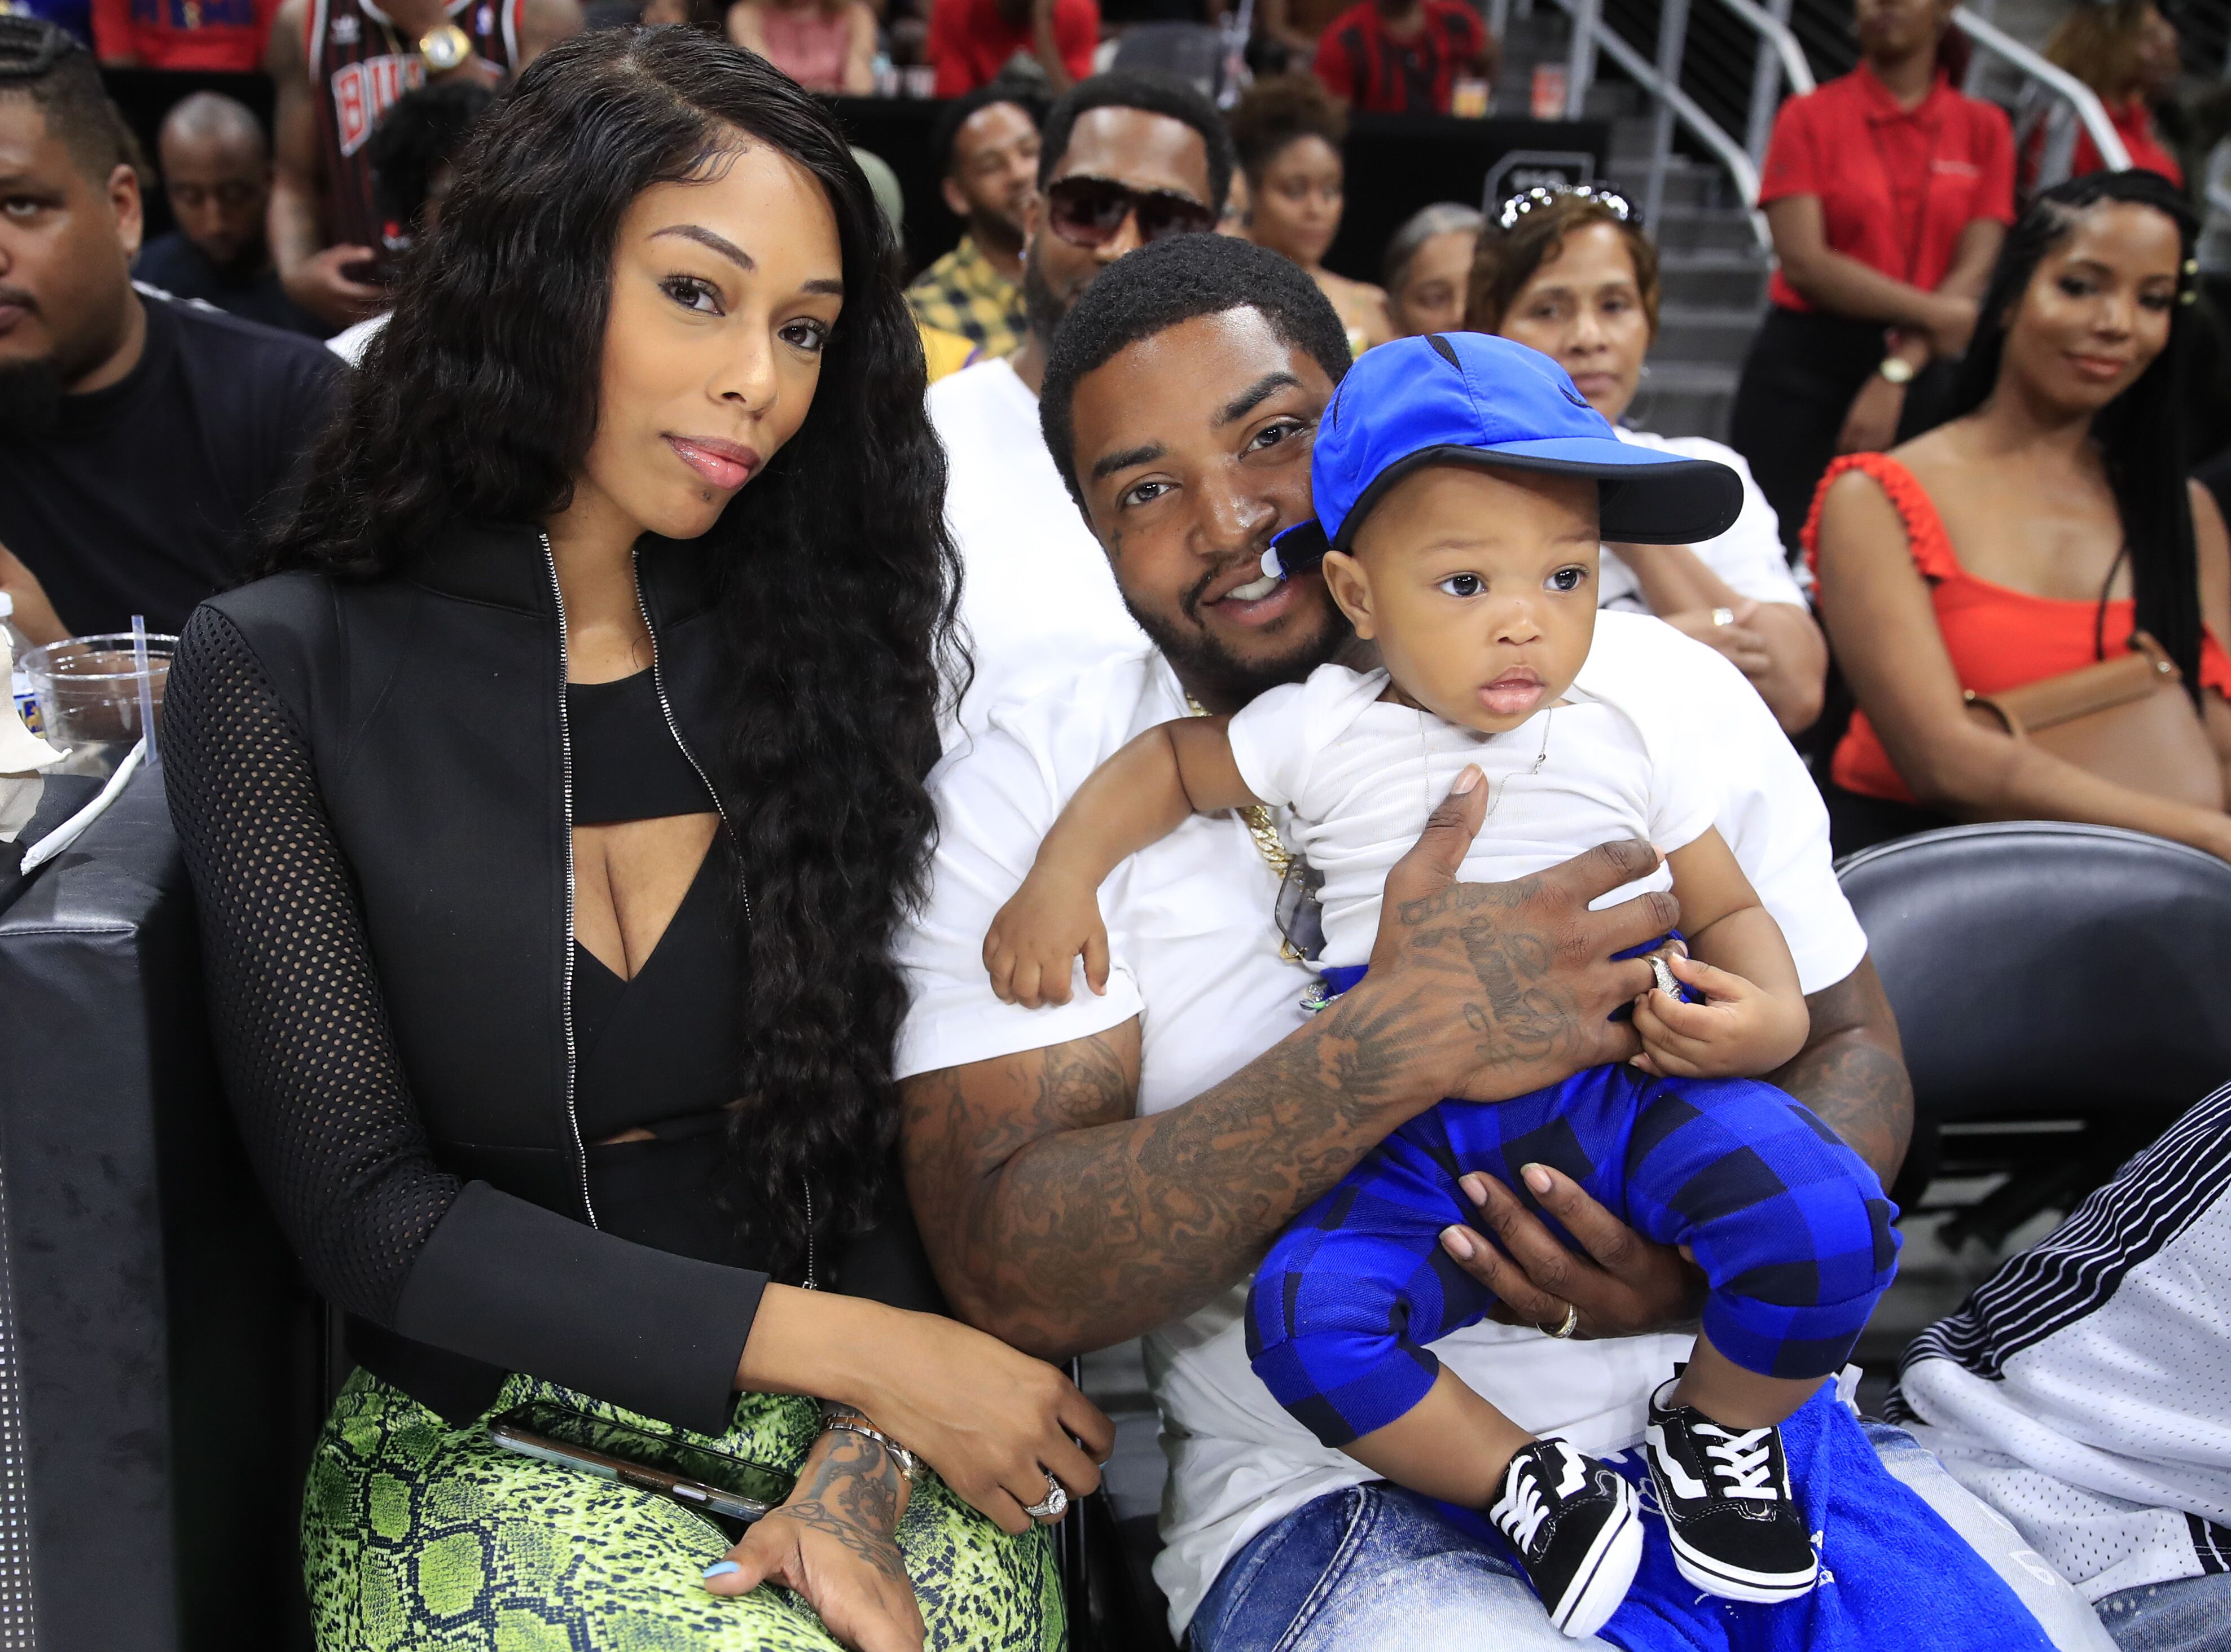 Lil Scrappy and Bambi Benson attend an NBA game with their son Prince Breland | Source: Getty Images/GlobalImagesUkraine